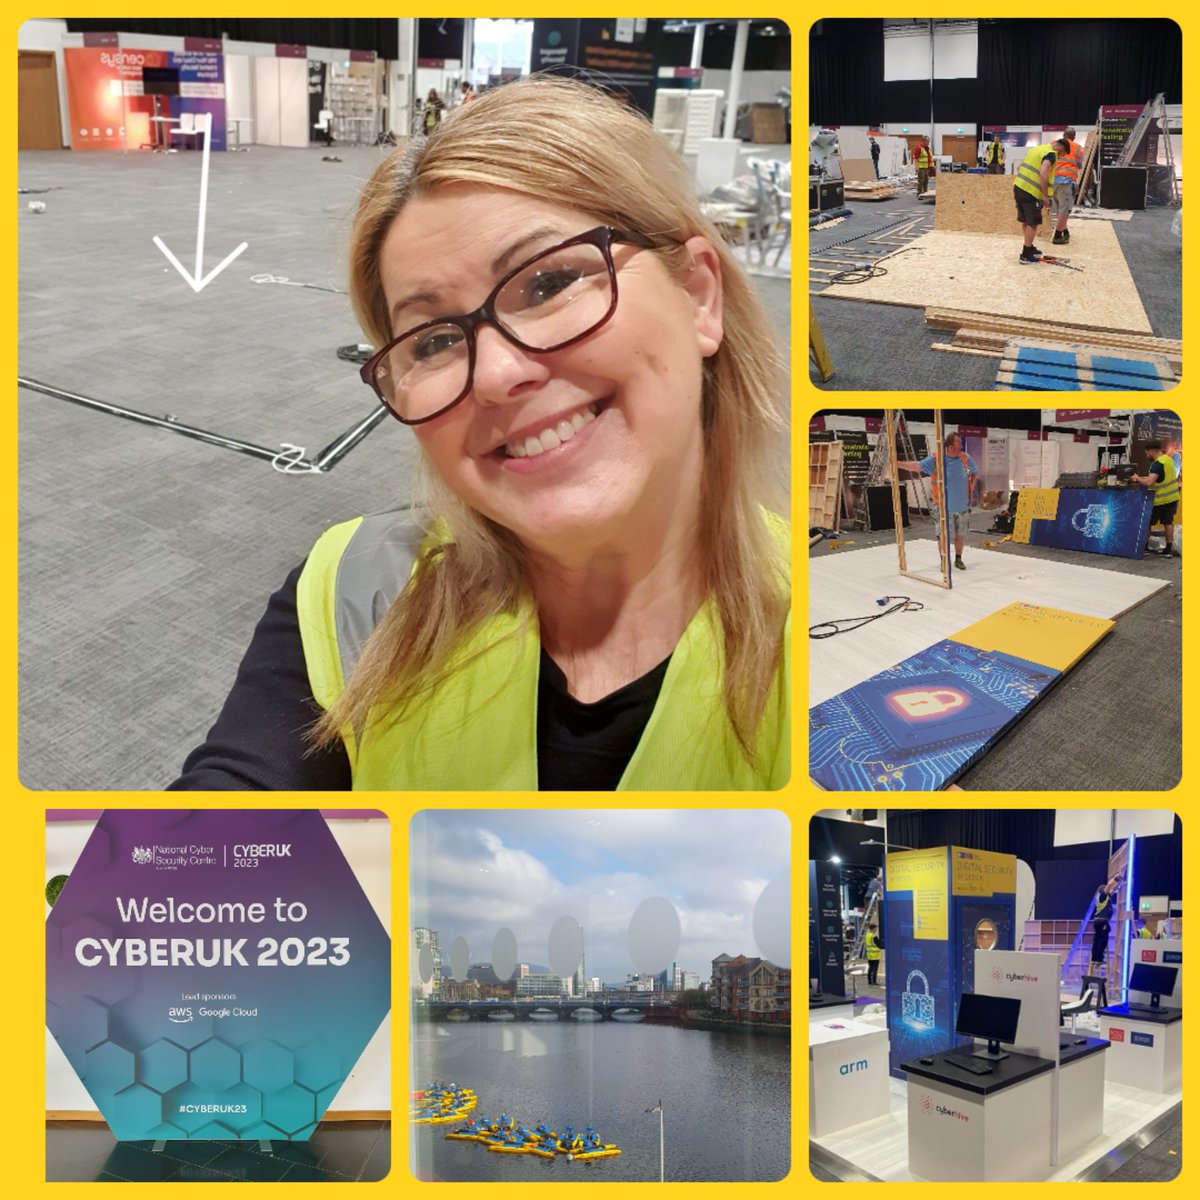 Its been a very busy few months and day preparing and finally building our stand and panel for #CYBERUK23. Looking forward to showcasing mu beautiful Home City #Belfast and the sun is shining. #DSbD @NCSC @UKRI_News @innovateuk